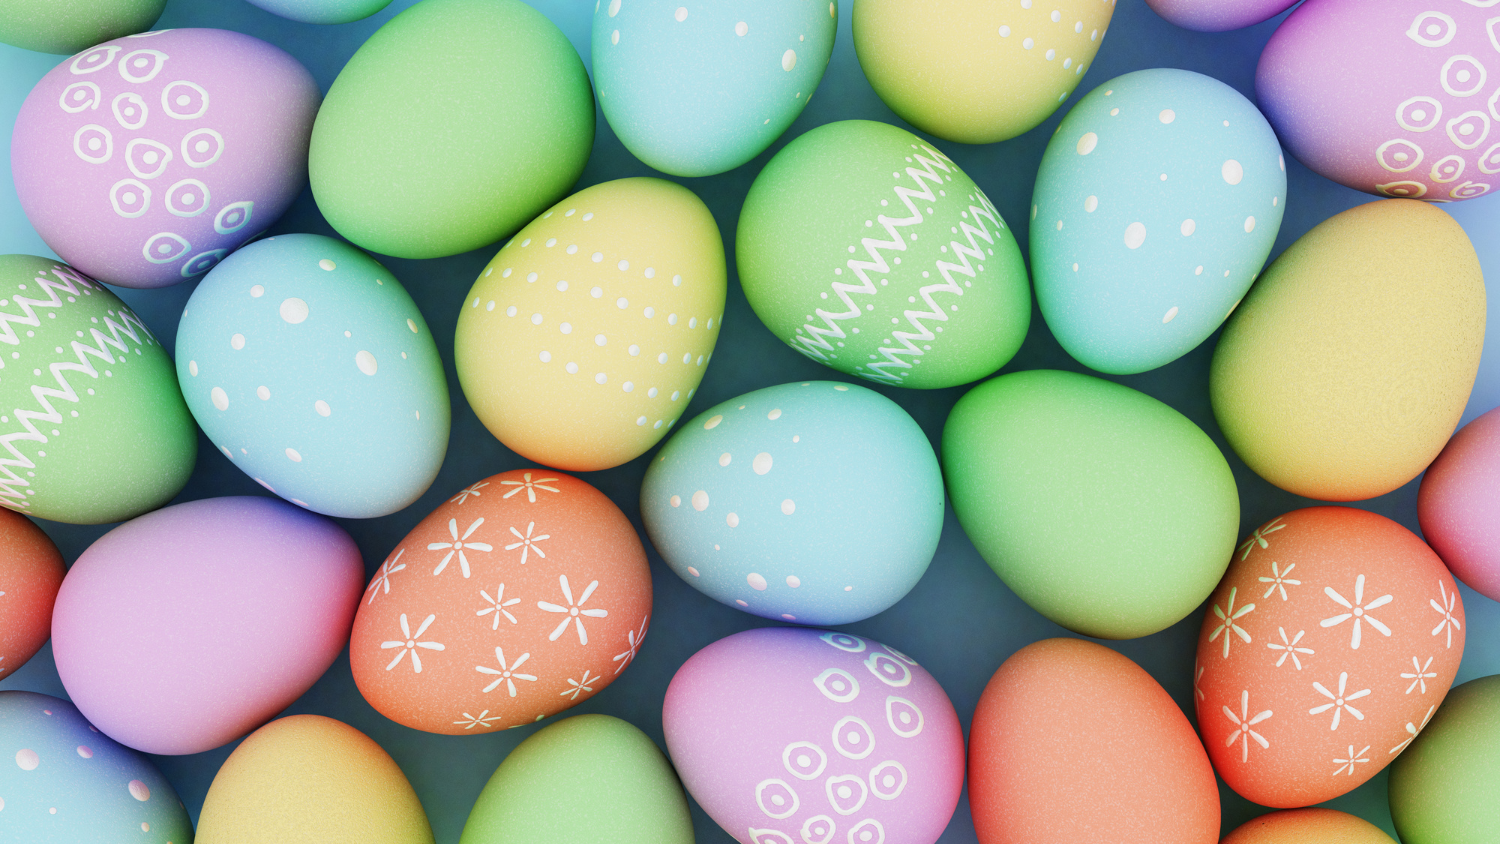 A group of brightly-colored decorated eggs.